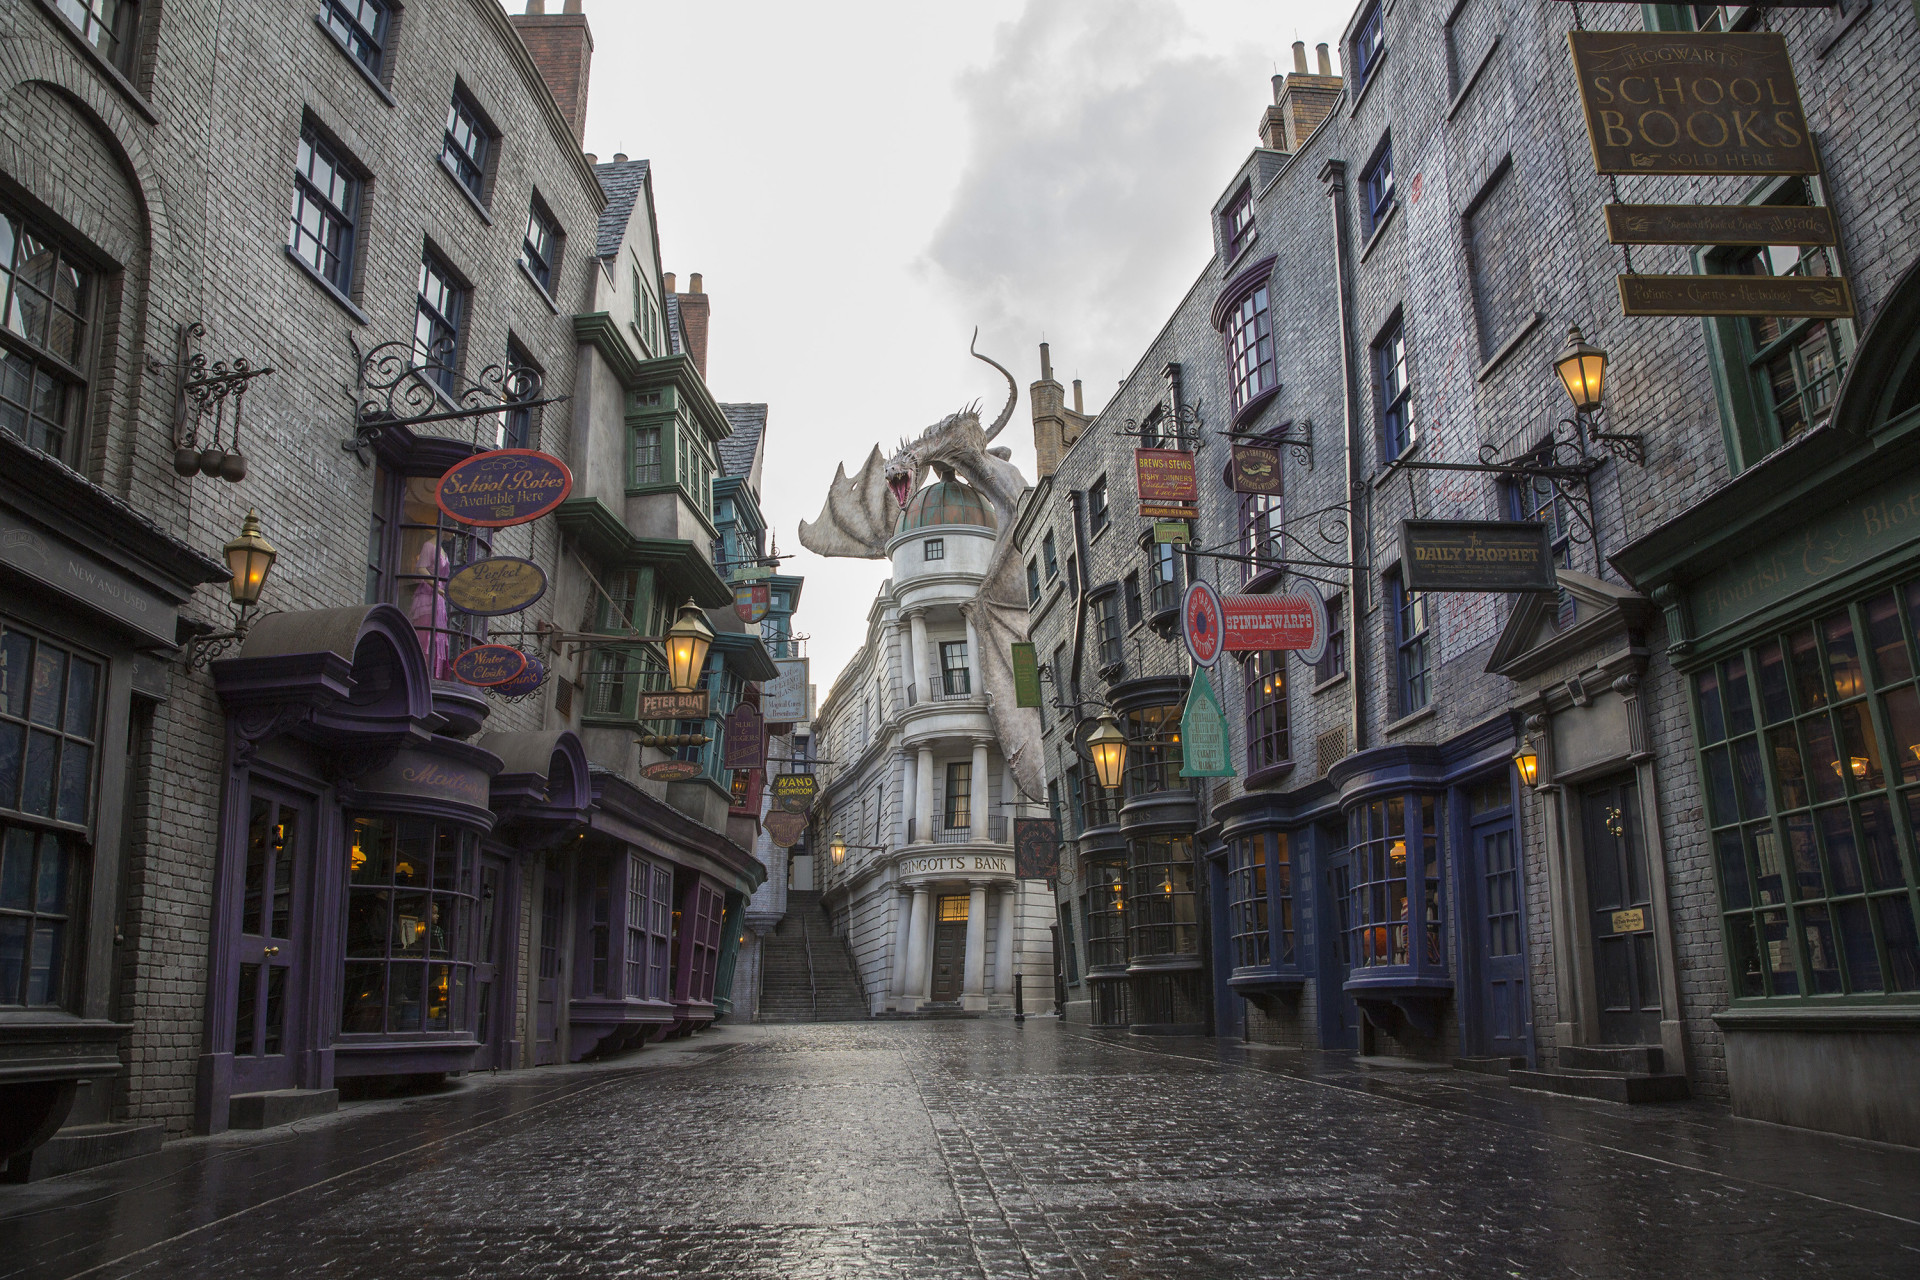 The magical street in London can also be seen at the theme park. It has already been expanded from the original Harry Potter attraction, which was inaugurated in 2010.<p>You may also like:<a href="https://www.starsinsider.com/n/334634?utm_source=msn.com&utm_medium=display&utm_campaign=referral_description&utm_content=386265v16en-us"> Braving the daily commute around the world</a></p>